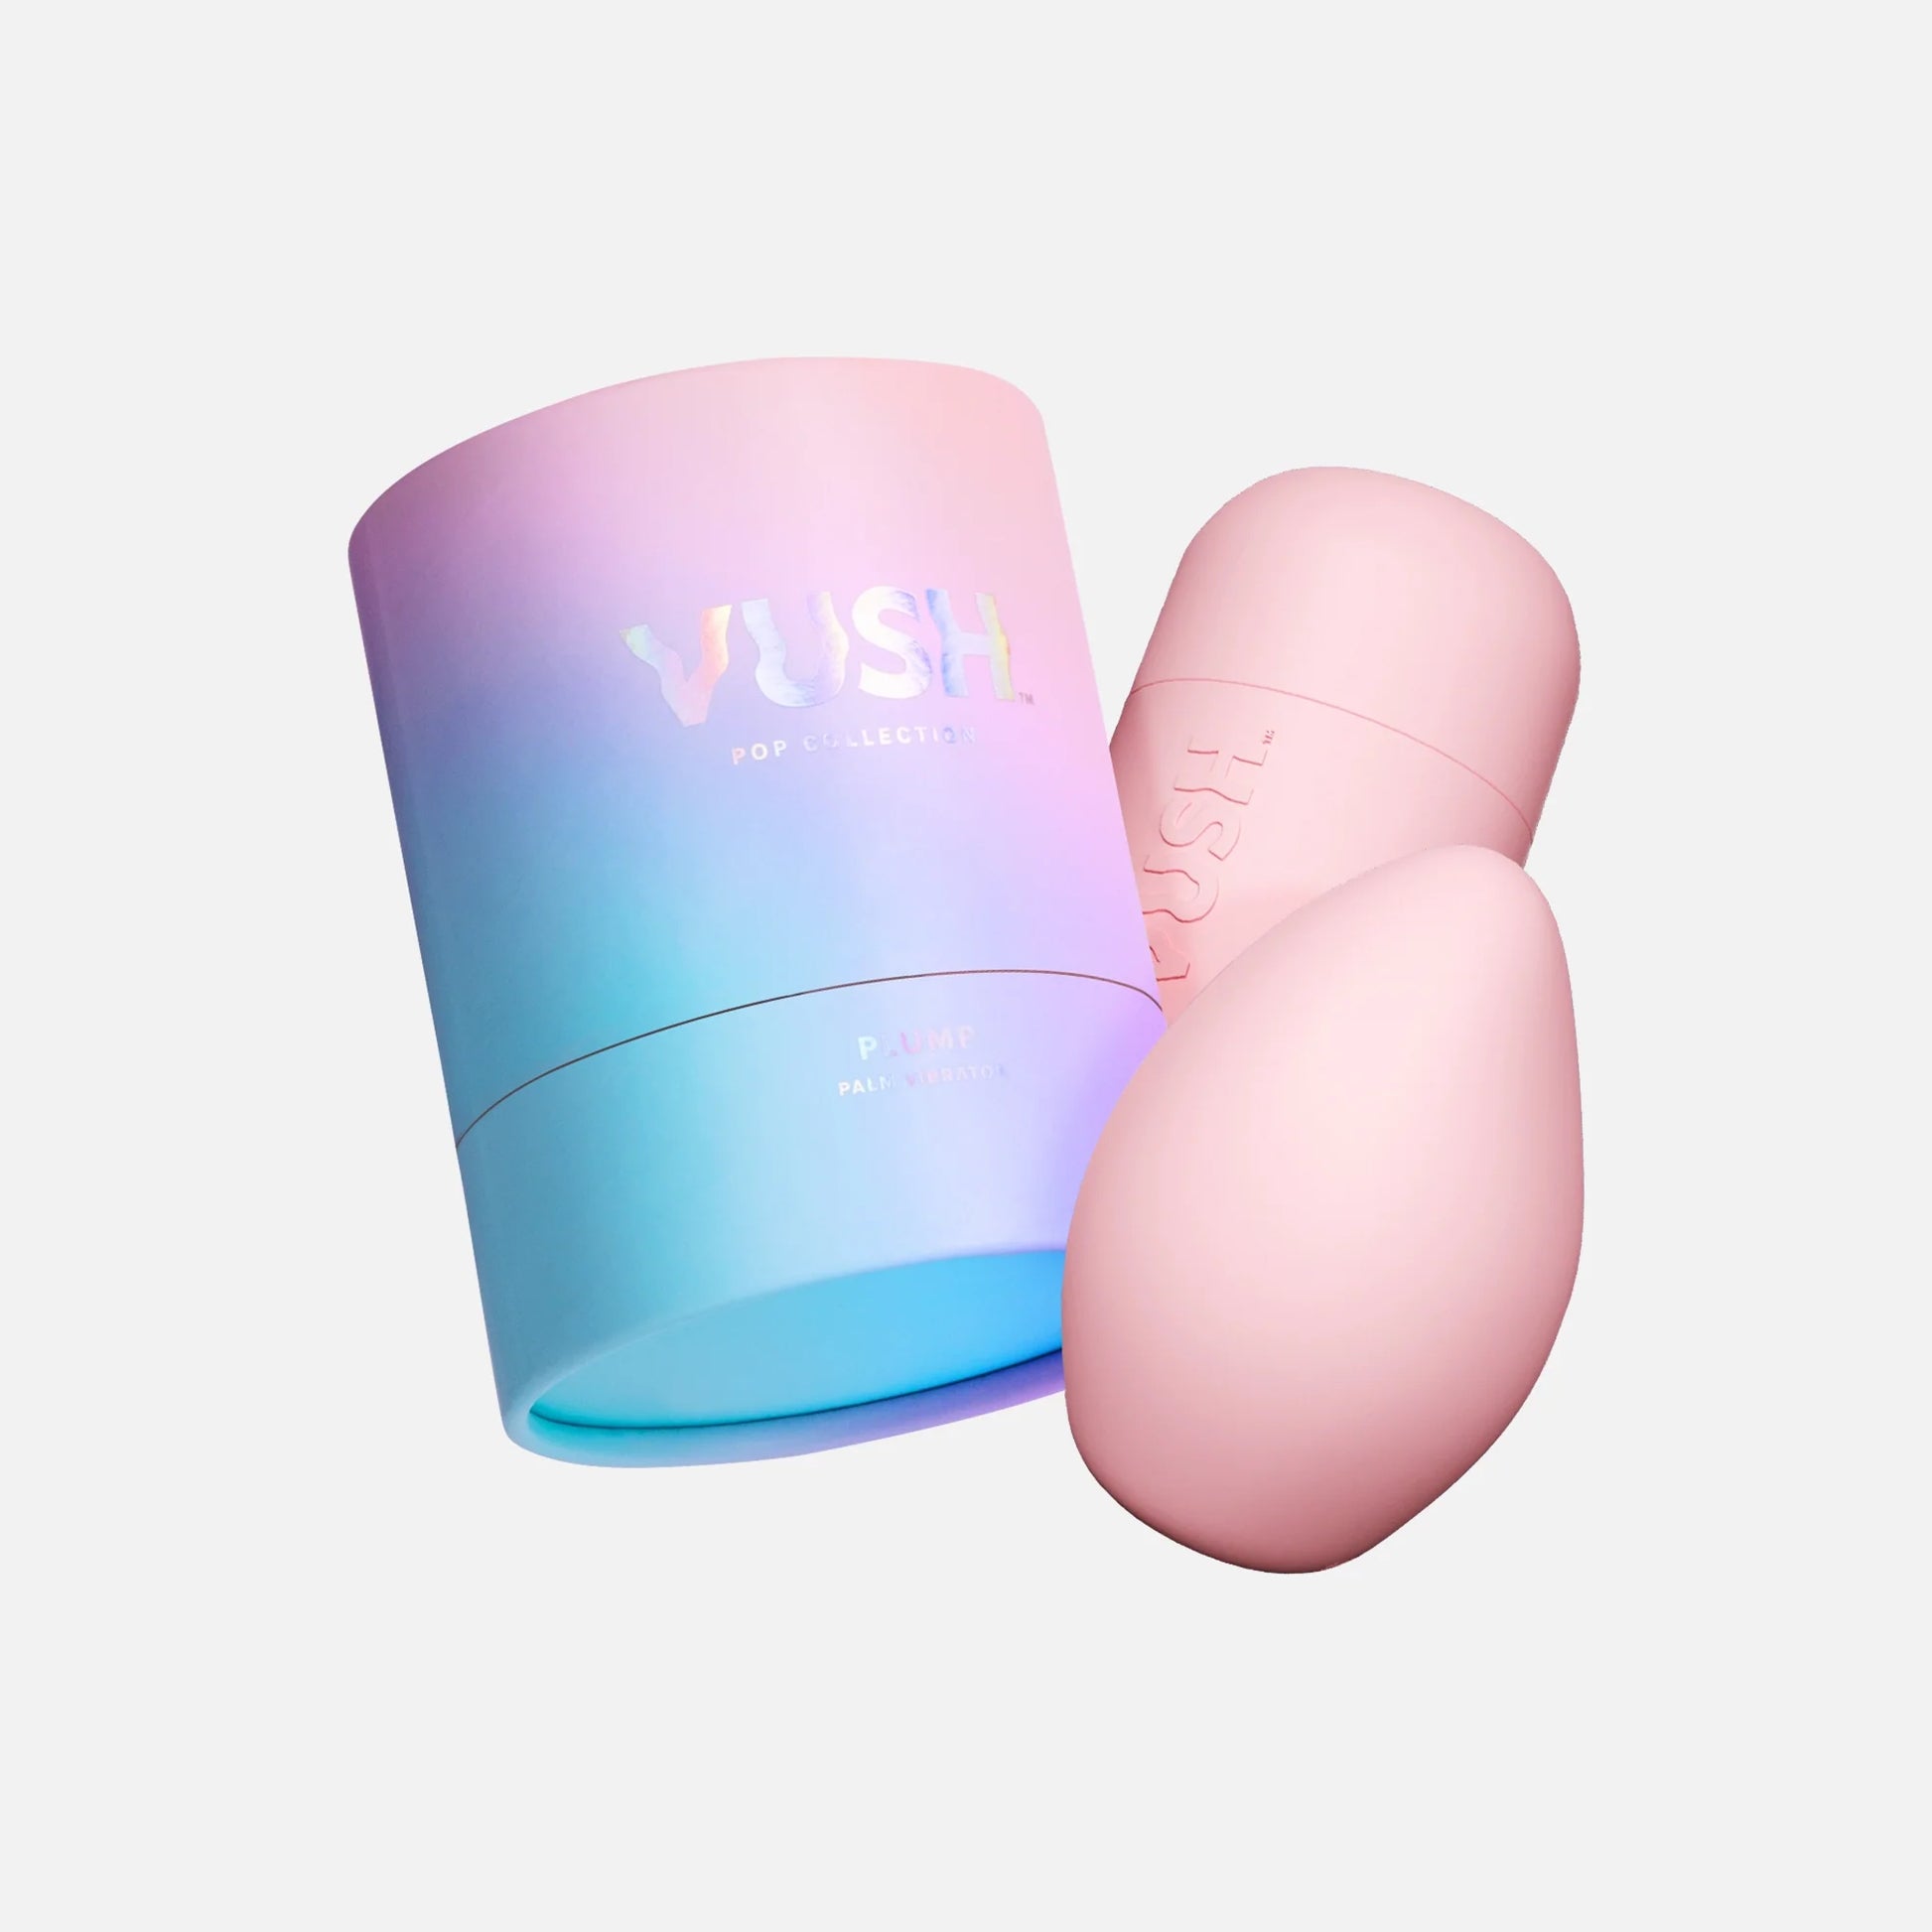 VUSH Plump Palm Vibrator in Pink Friday colourway in front of pink case, next to pink/purple/gradient cylinder packaging against light grey background.